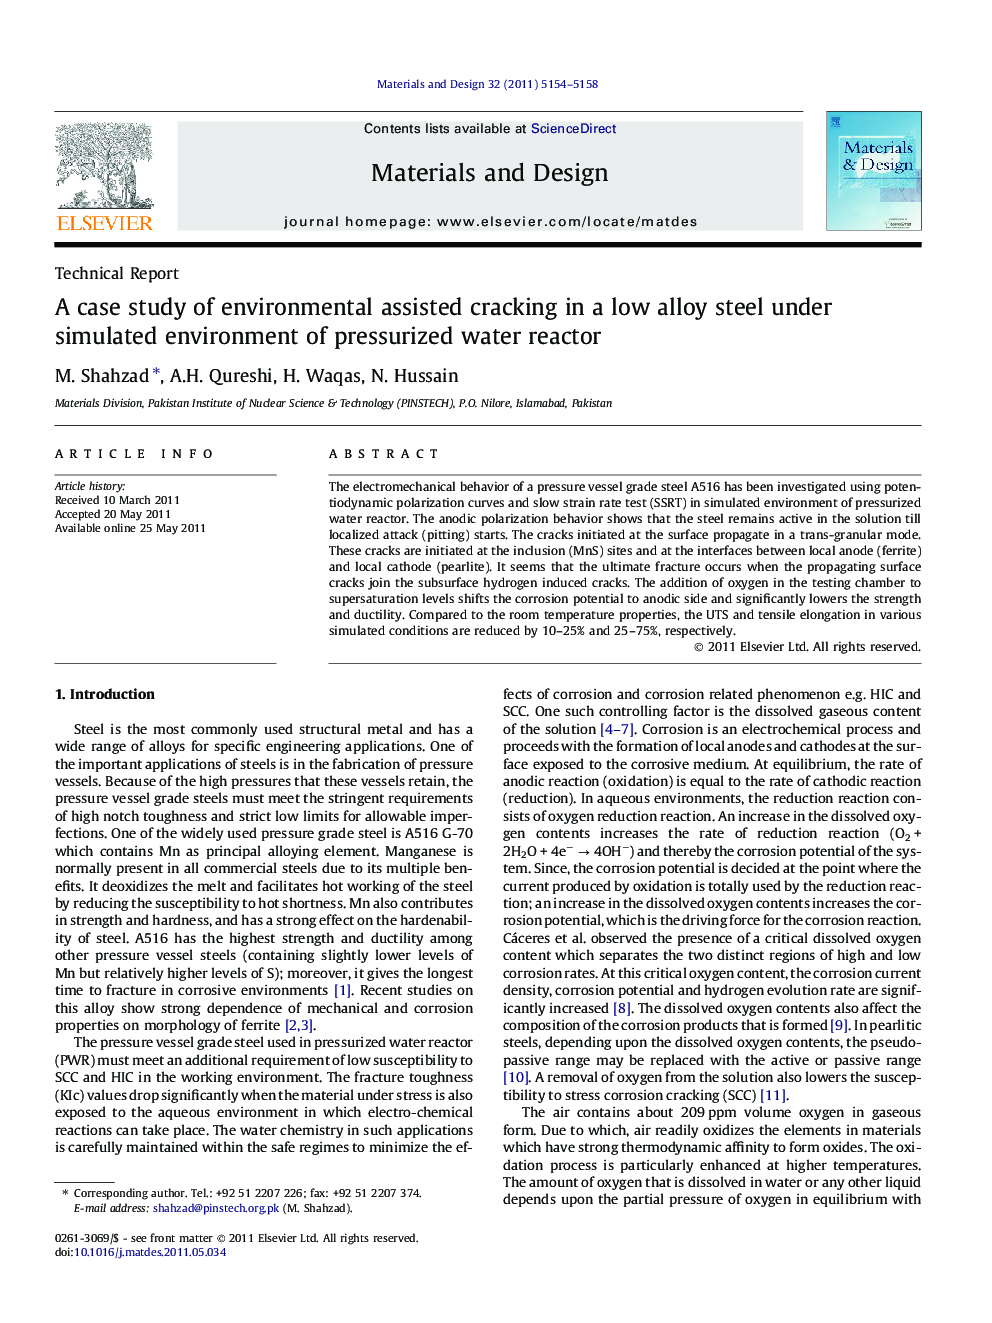 A case study of environmental assisted cracking in a low alloy steel under simulated environment of pressurized water reactor